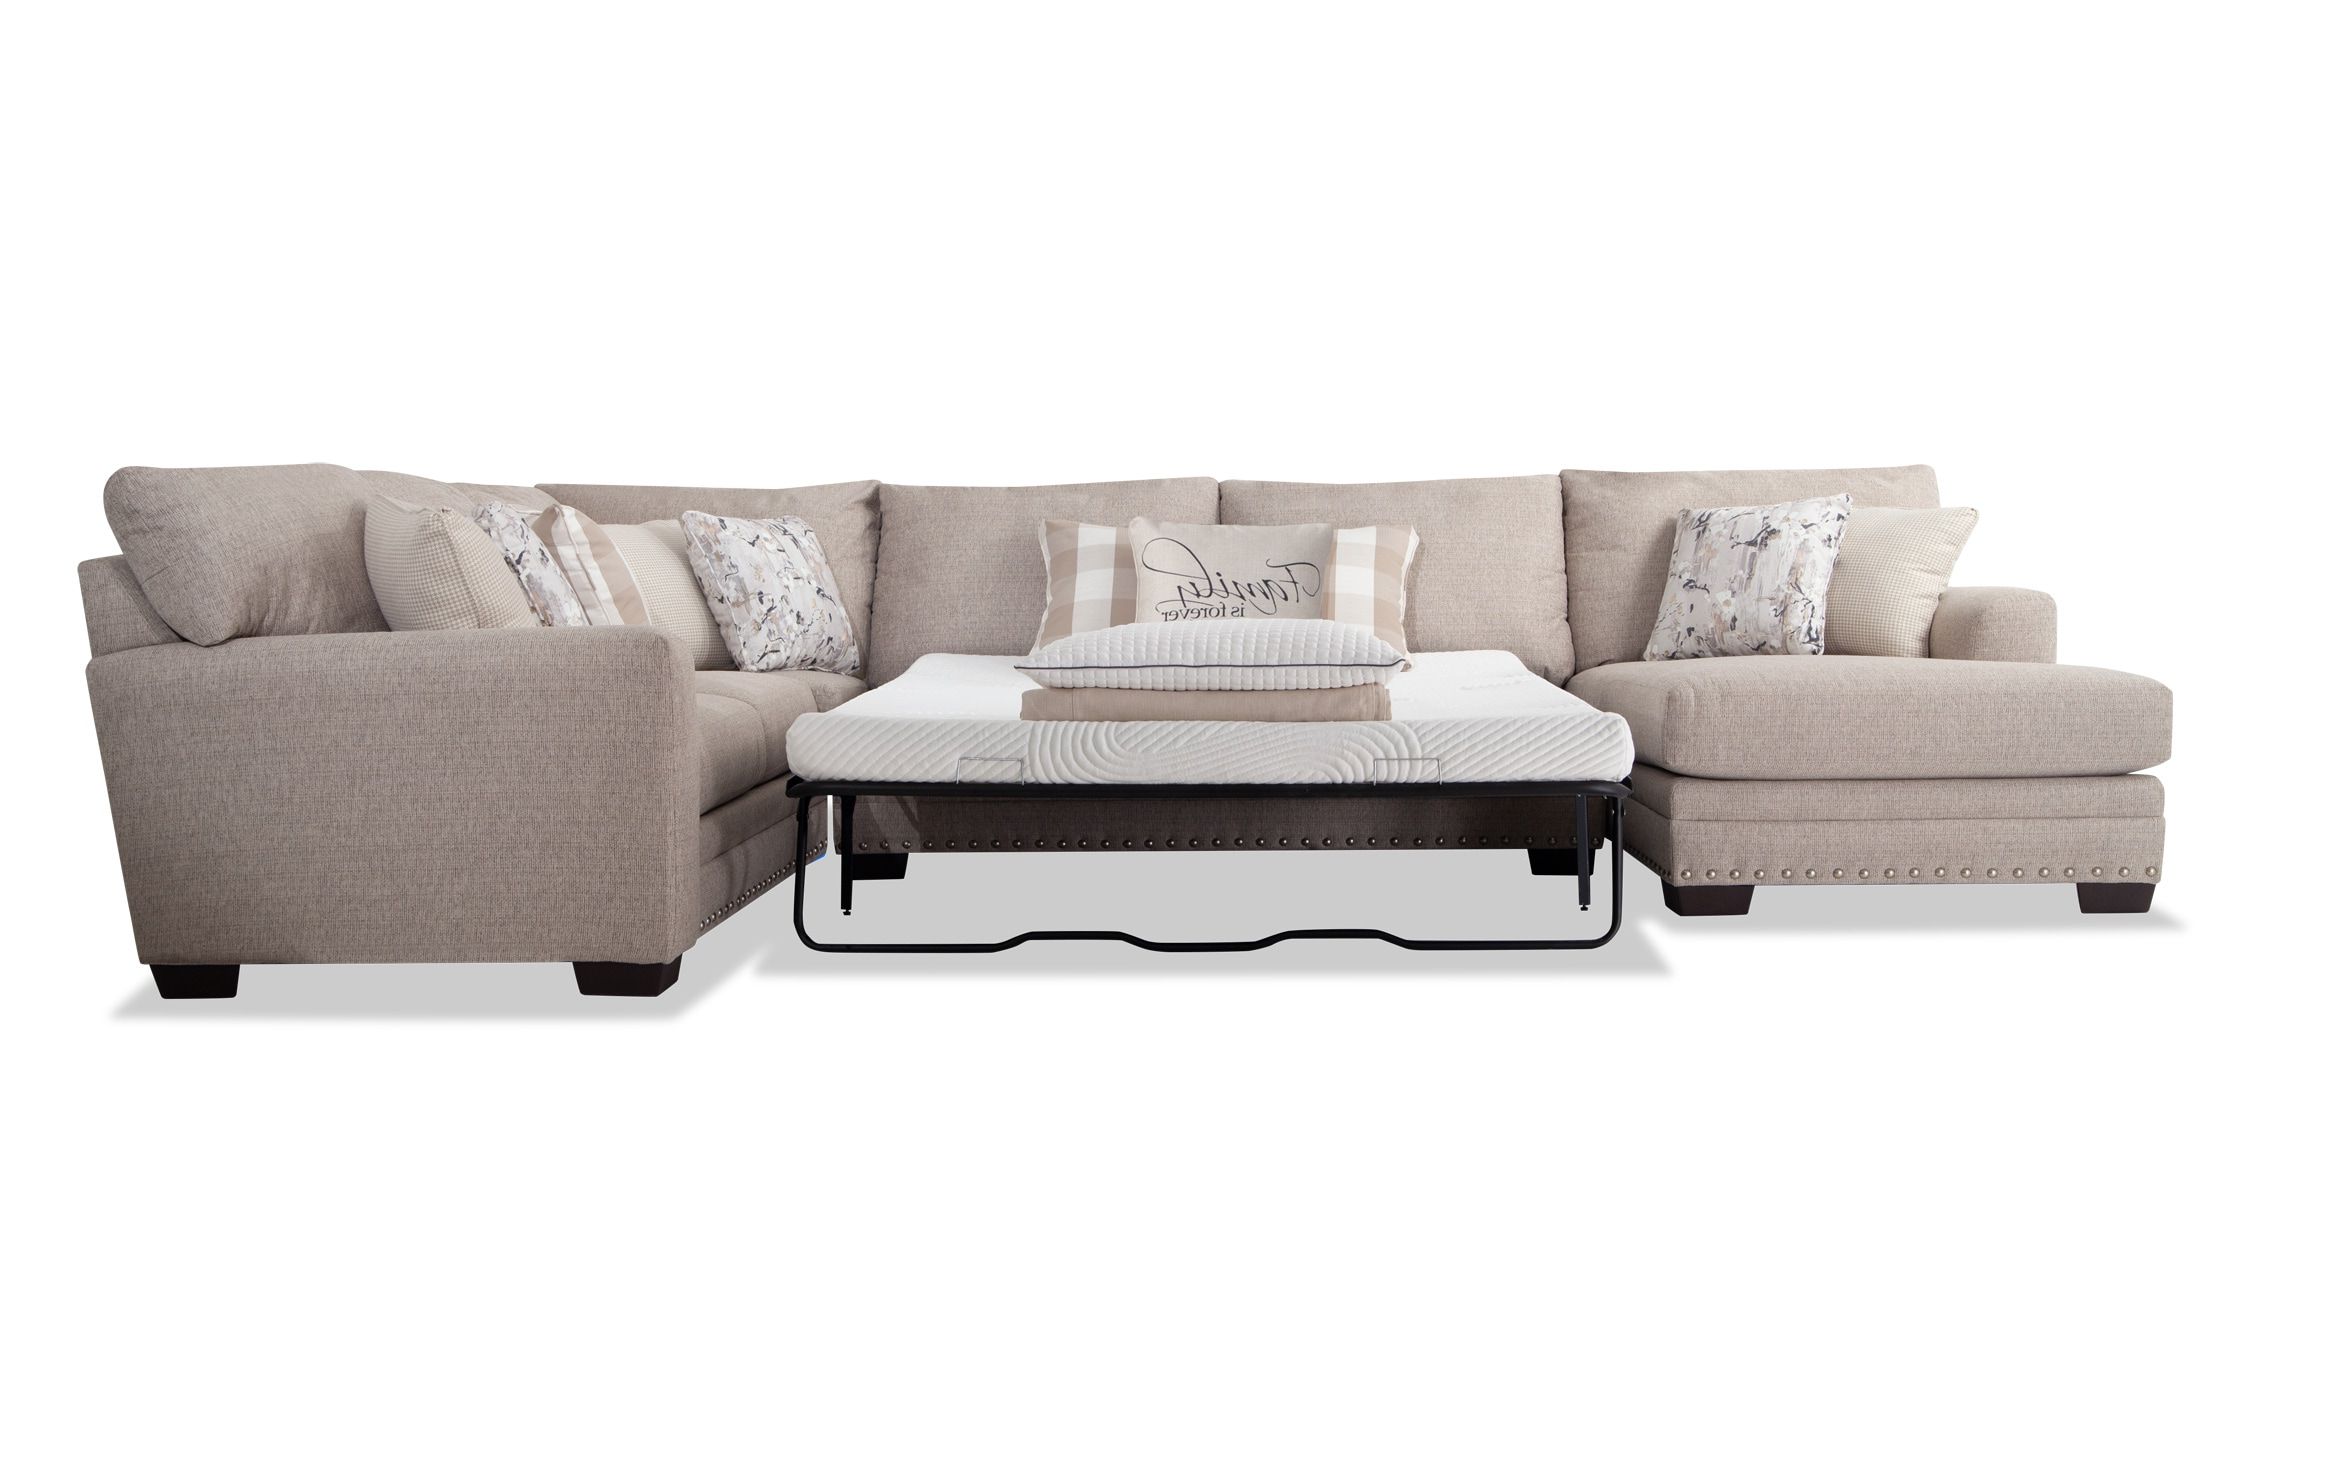 Cottage Chic Beige 4 Piece Right Arm Facing Bob O Pedic Queen Sleeper  Sectional | Bob's Discount Furniture With Regard To Left Or Right Facing Sleeper Sectional Sofas (Gallery 12 of 20)